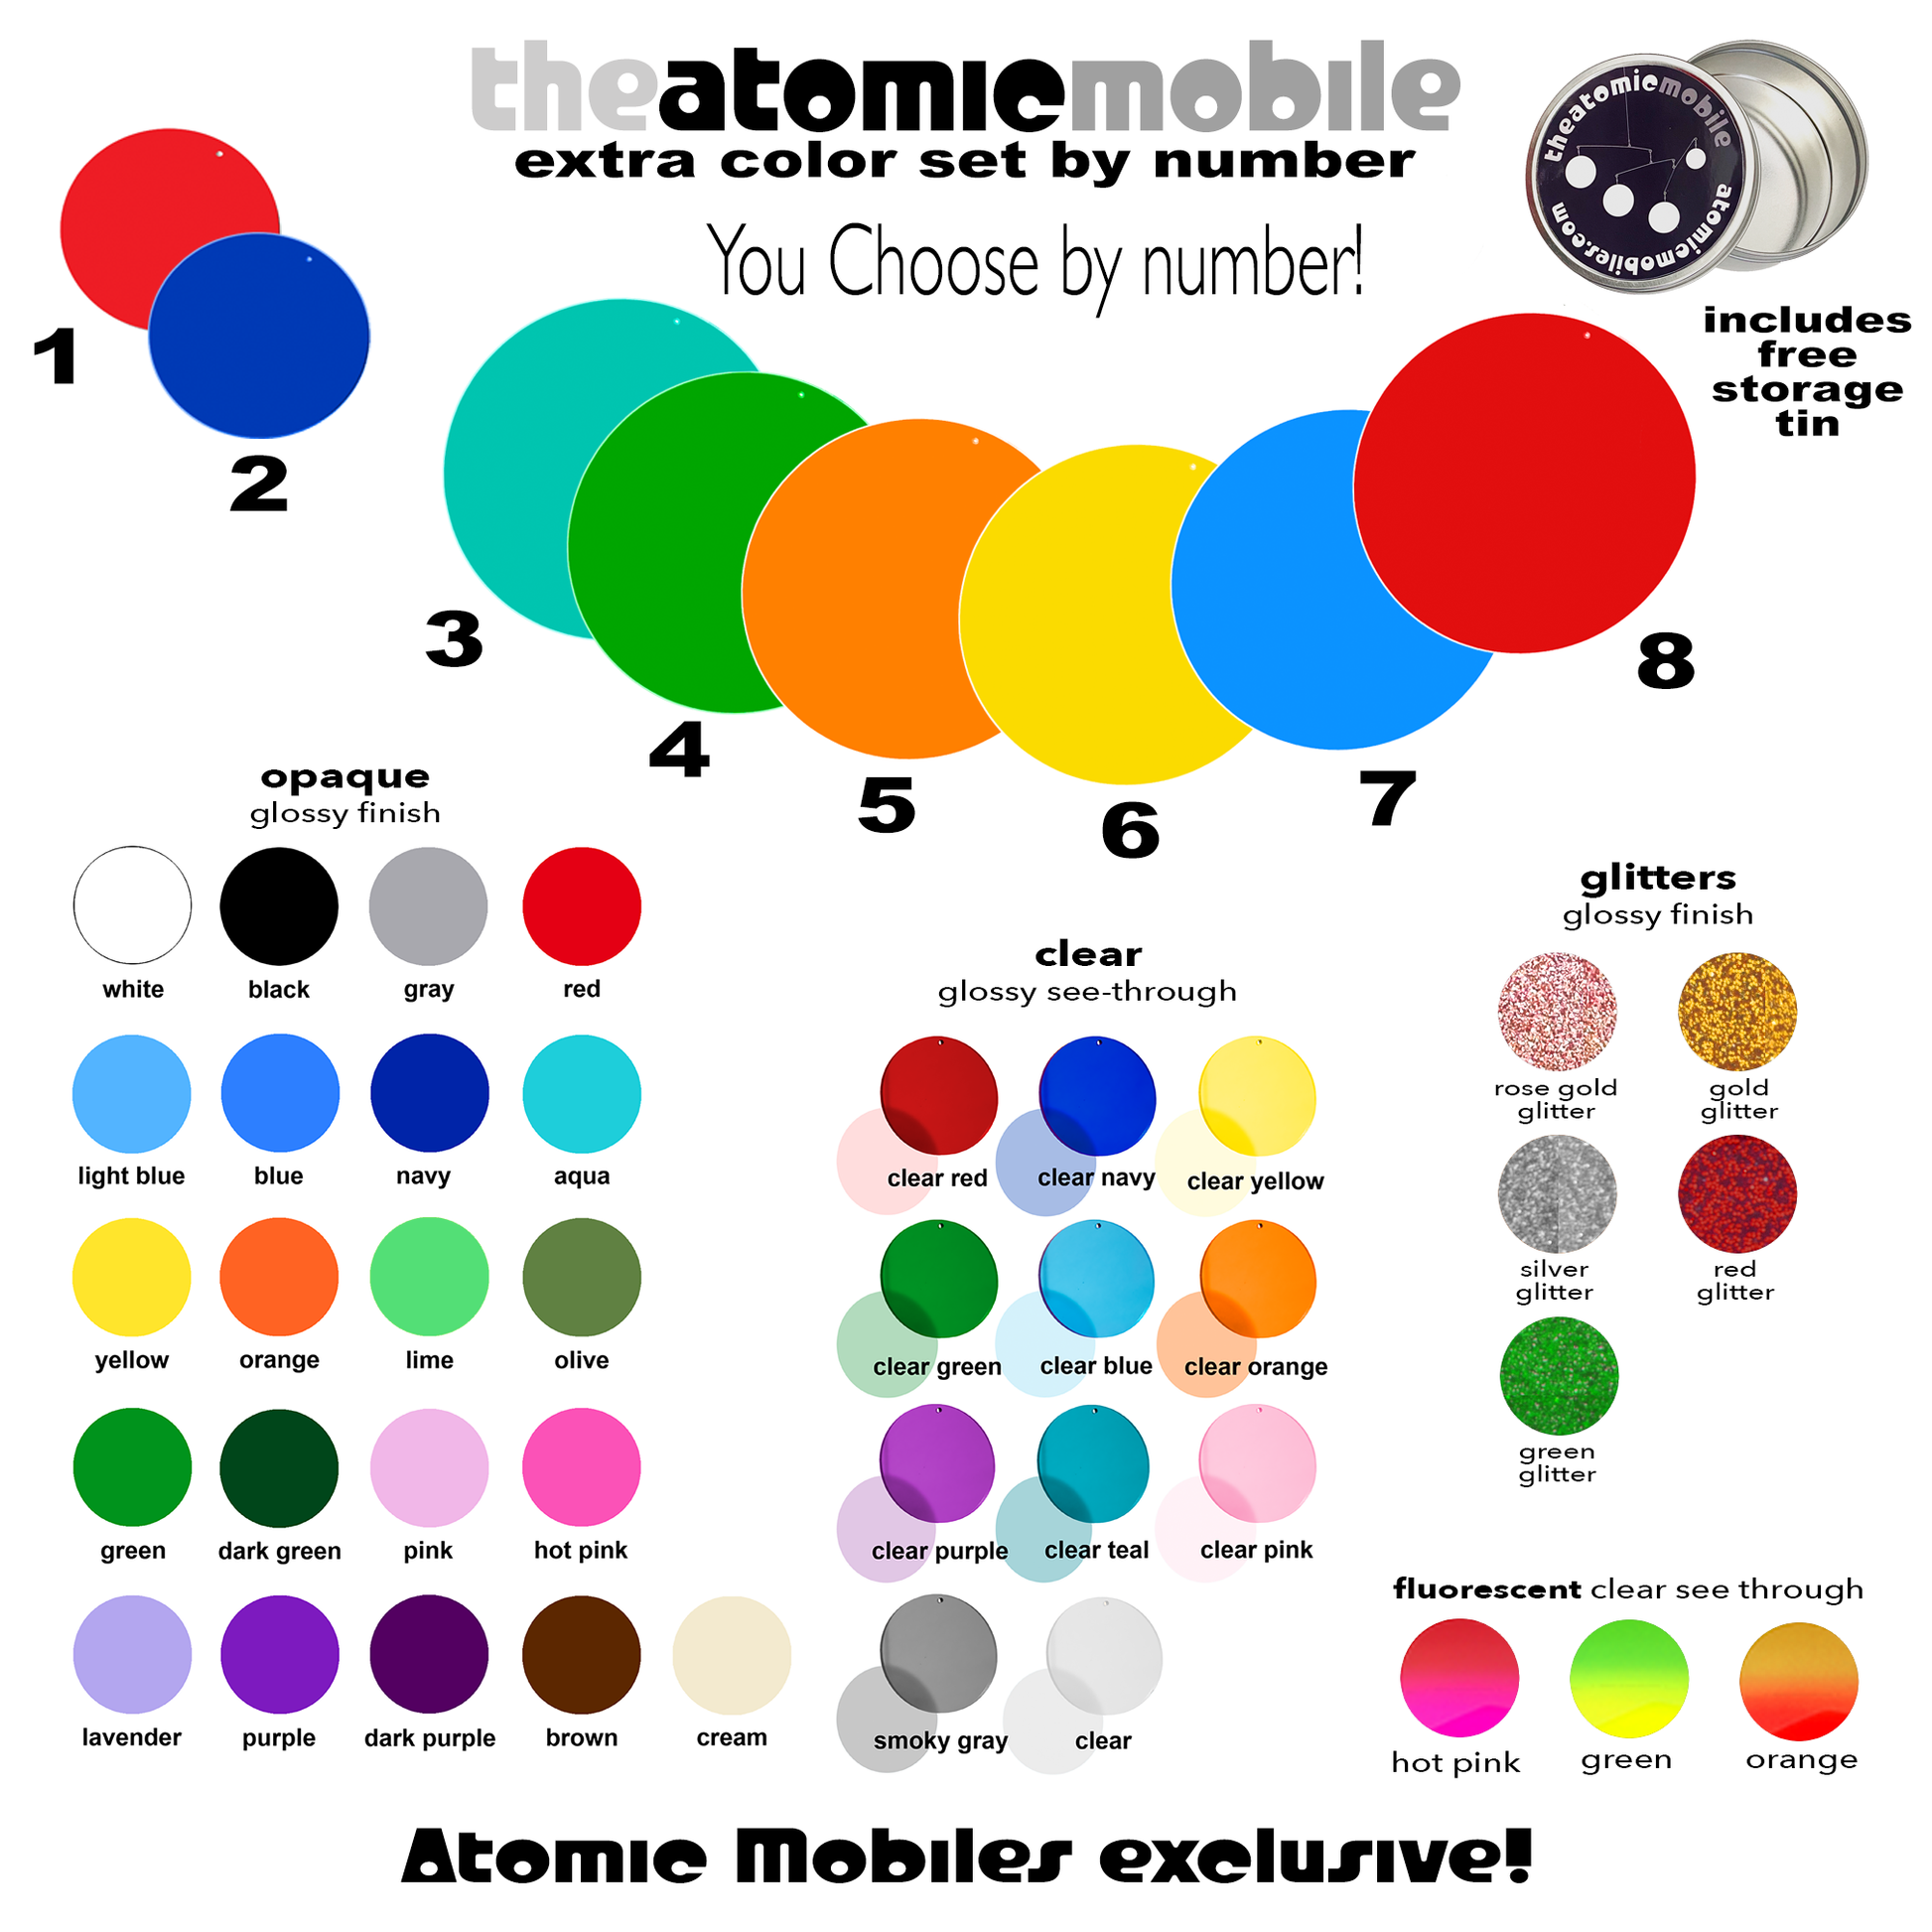 Color Chart for Extra Color Sets for the Atomic Mobile - modular design hanging art mobiles with interchangeable color discs by AtomicMobiles.com